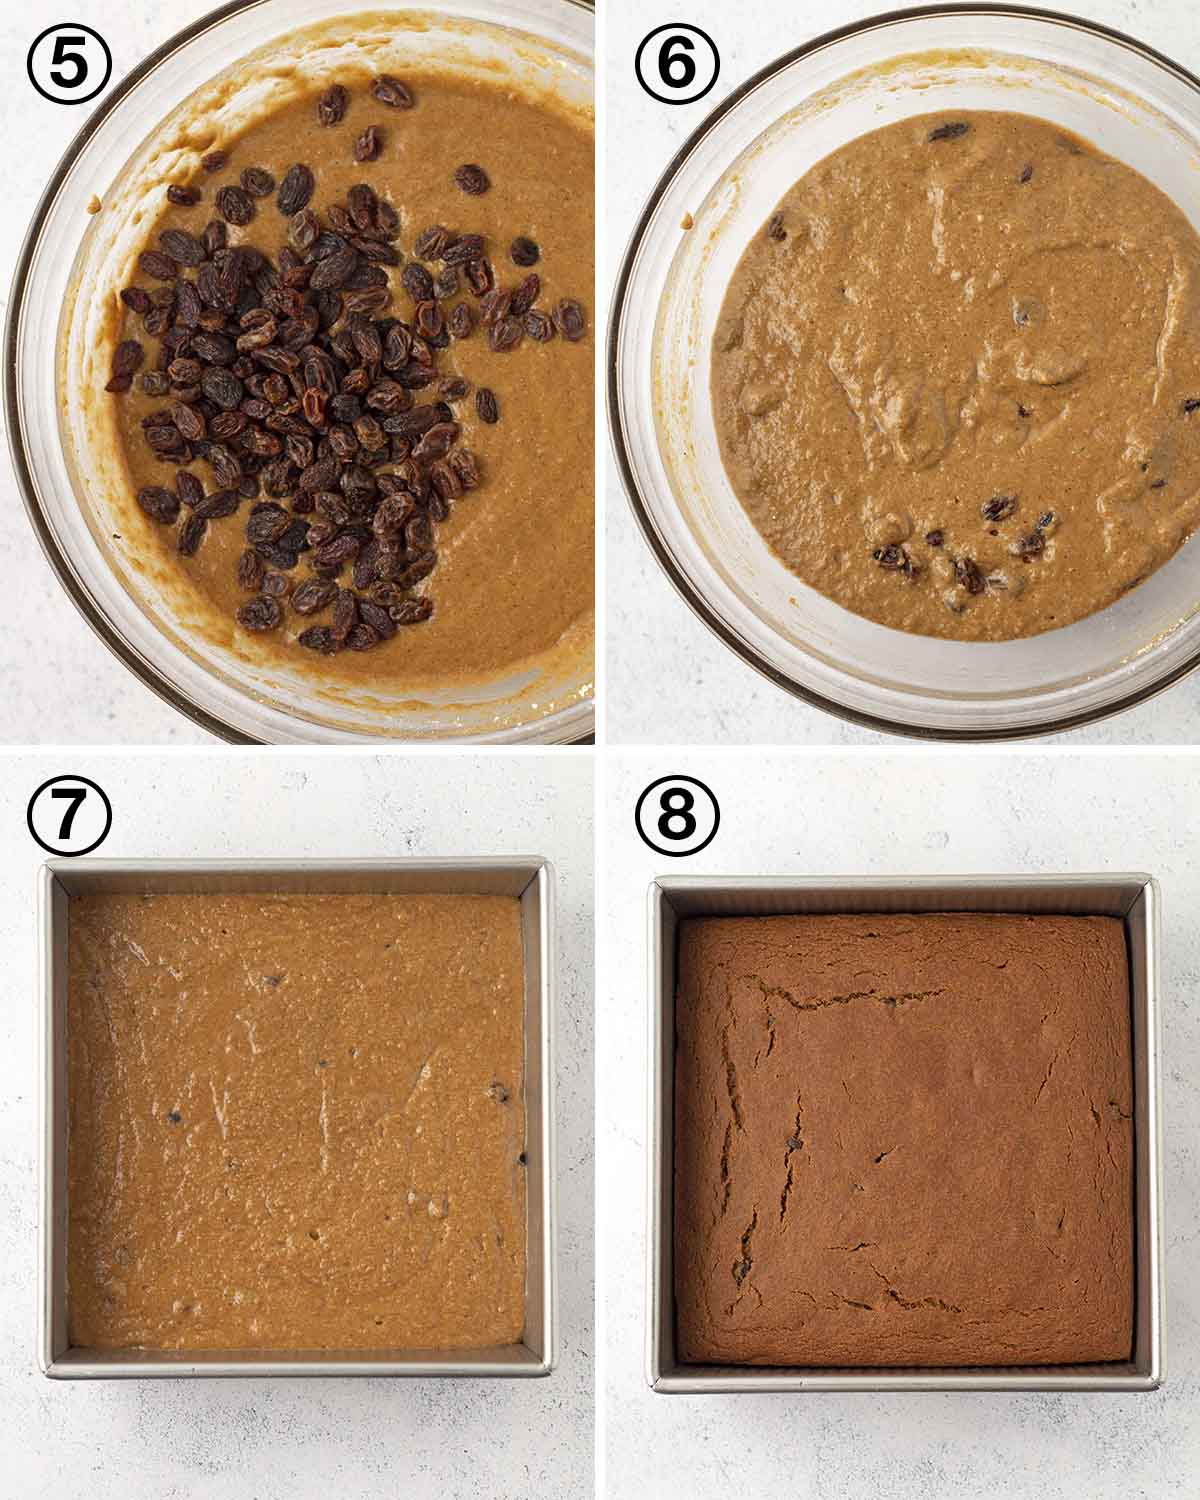 A collage of four images showing the second sequence of steps needed to make gluten-free applesauce cake.